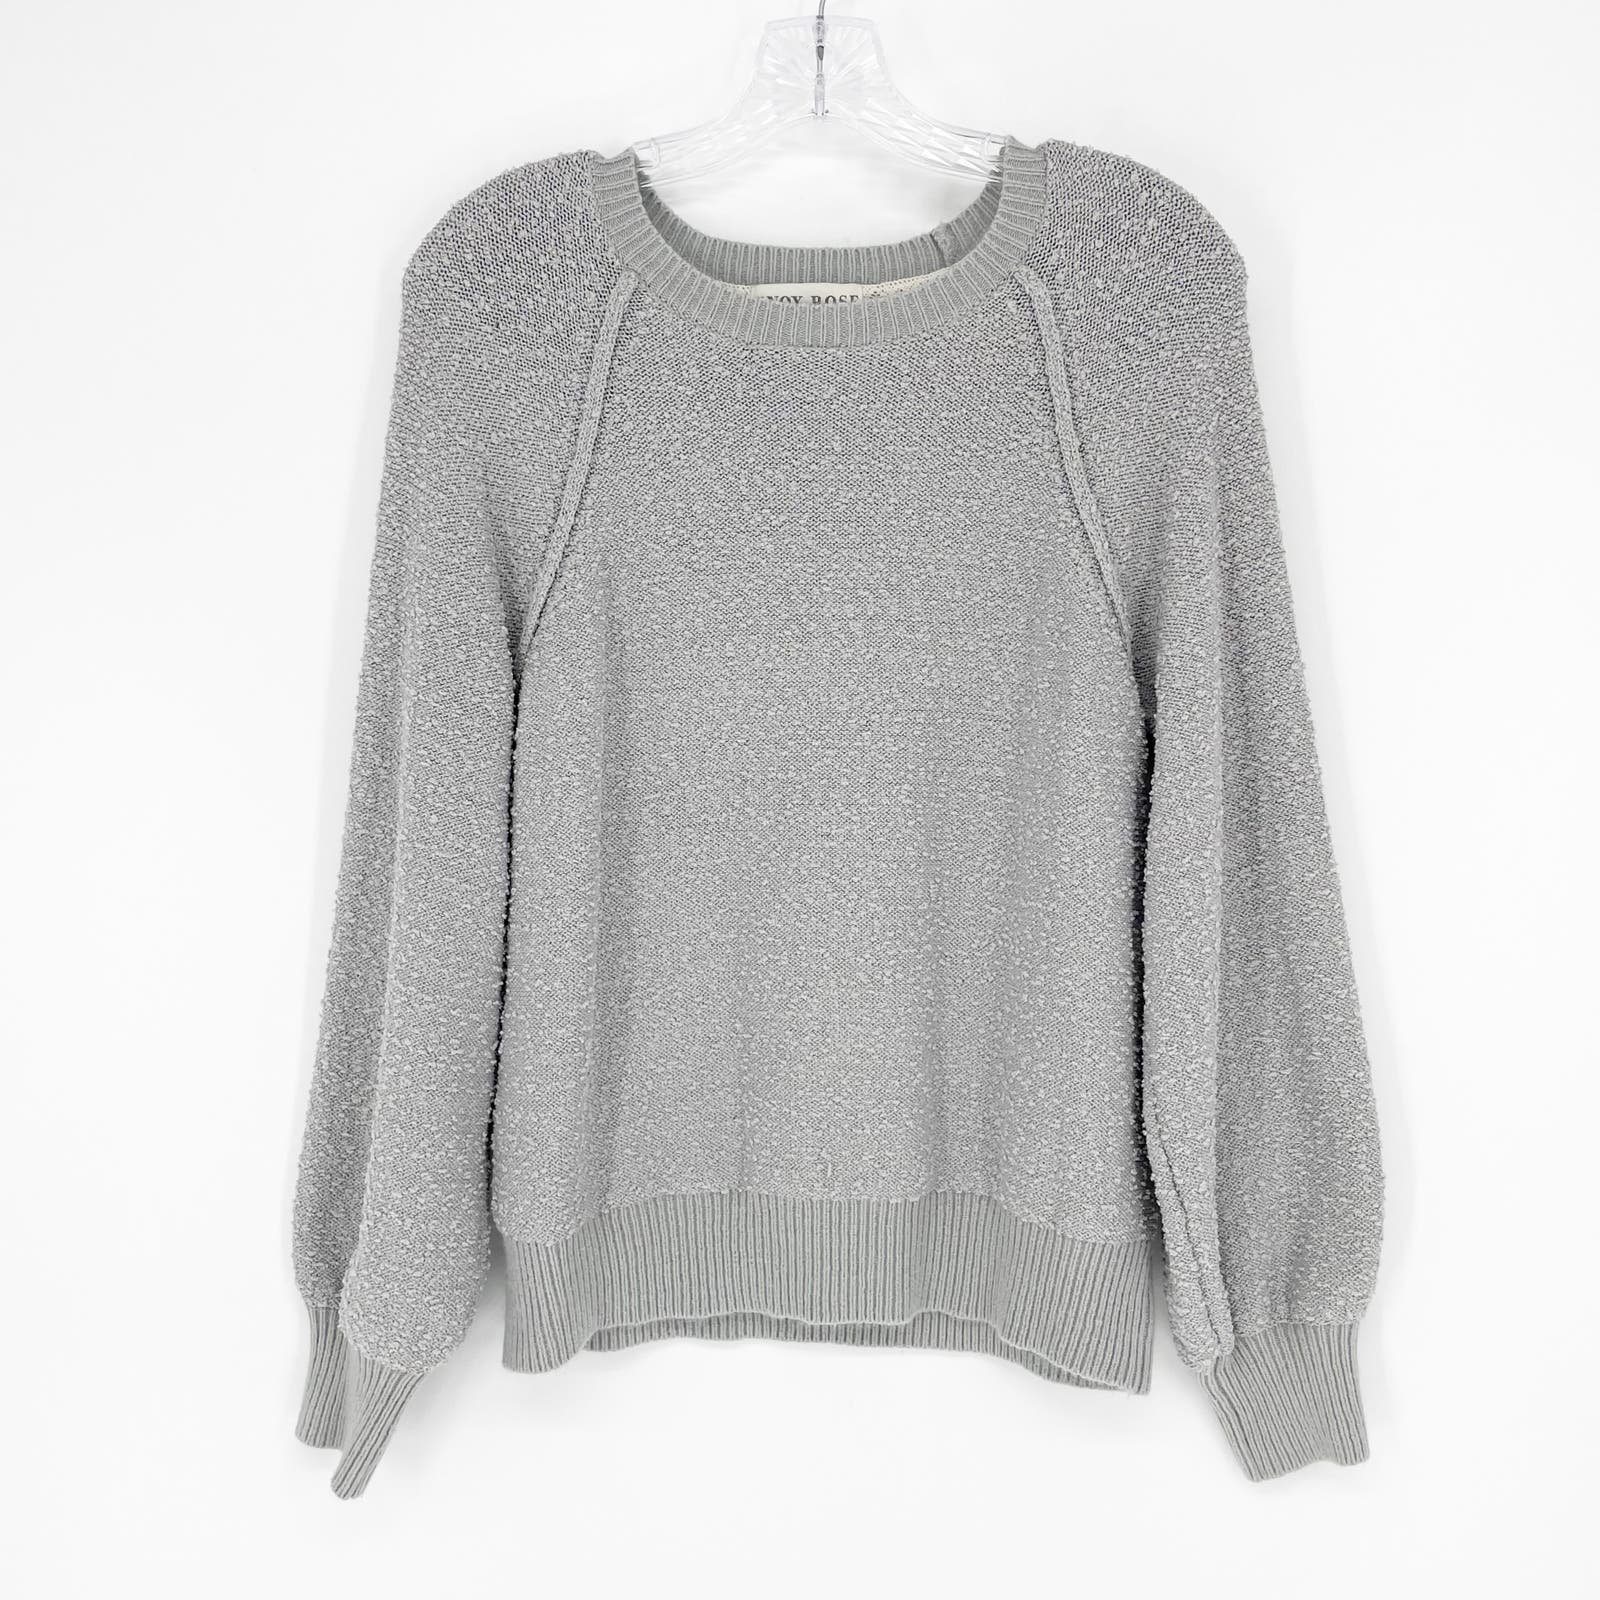 high discount Knox Rose Textured Gray Knit Sweater Size